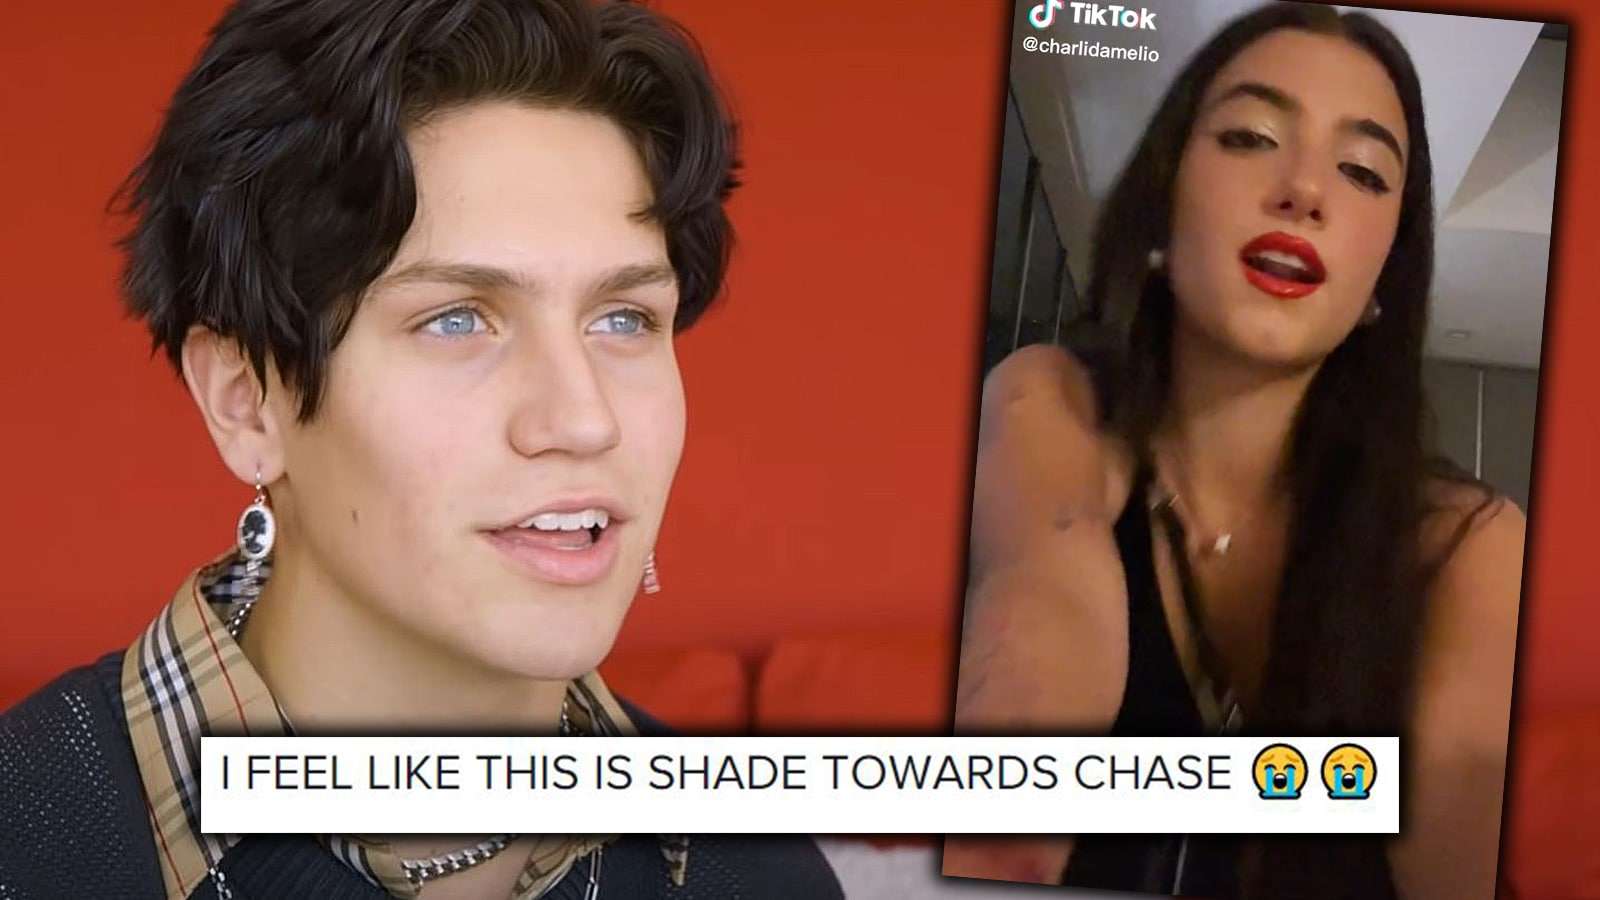 Charli clears up rumors of dissing chase hudson